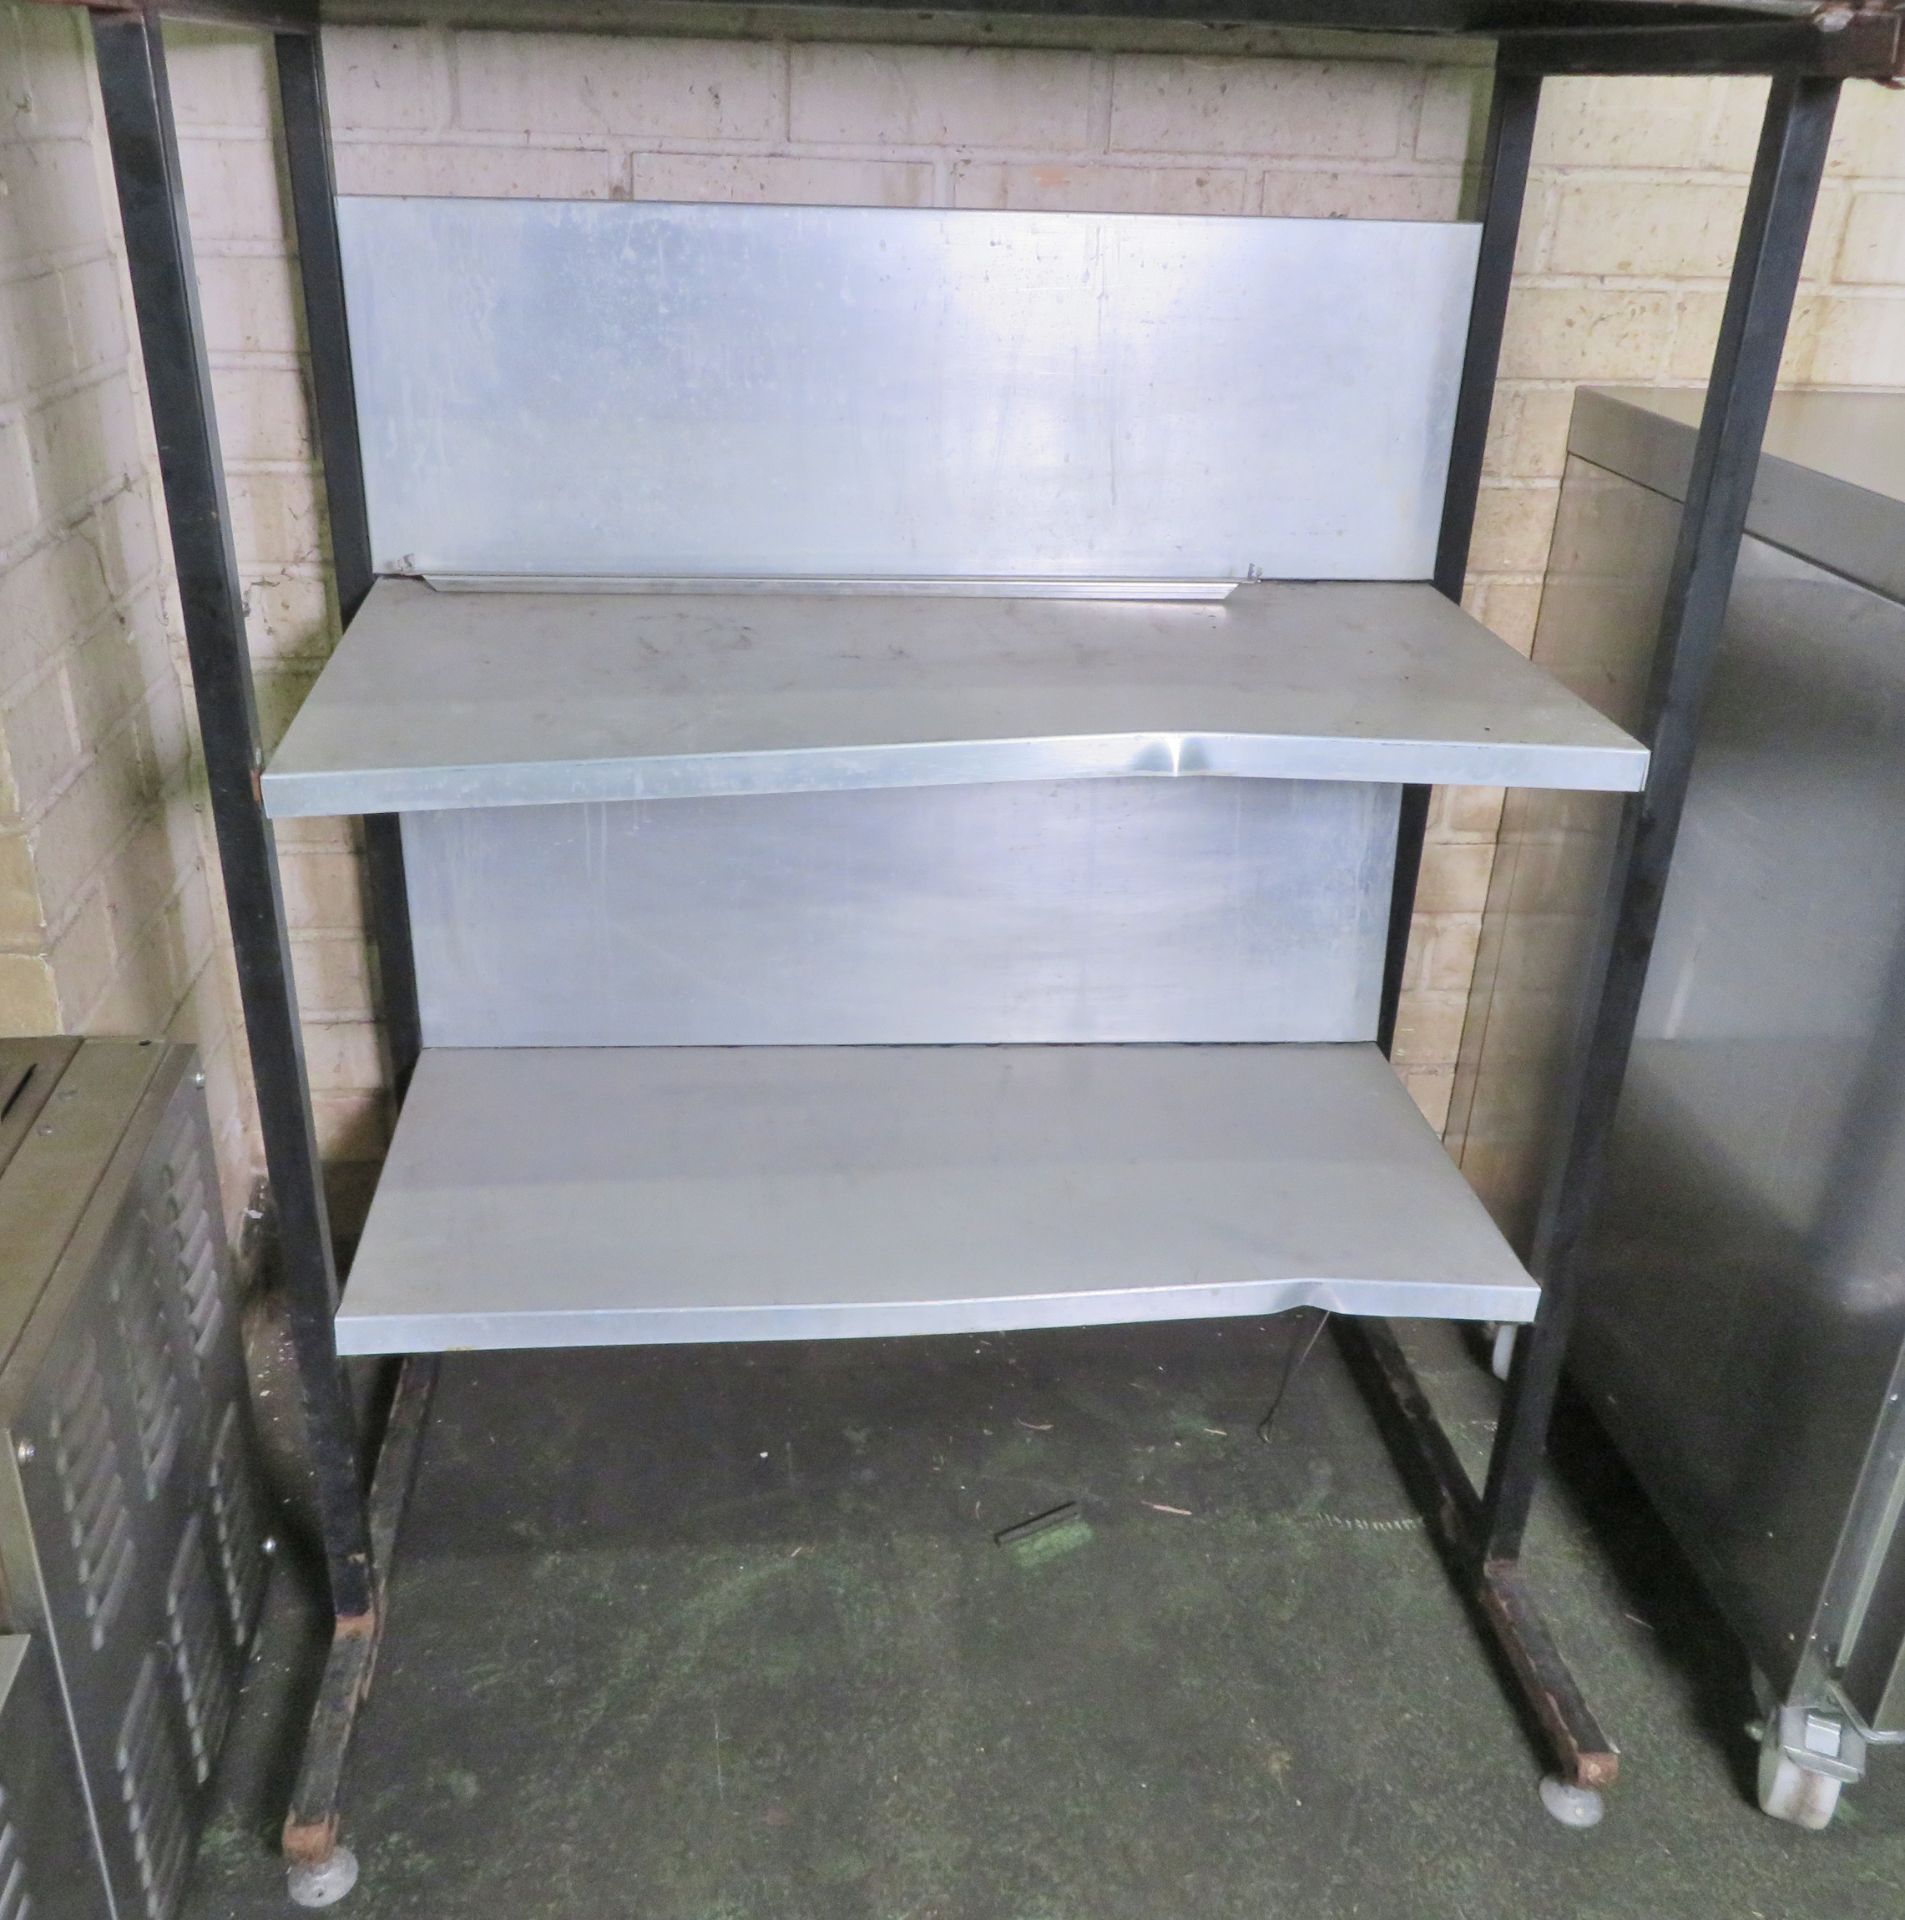 Steakhouse Grill On Stand L 520mm x W 900mm x H 1150mm - Image 4 of 4